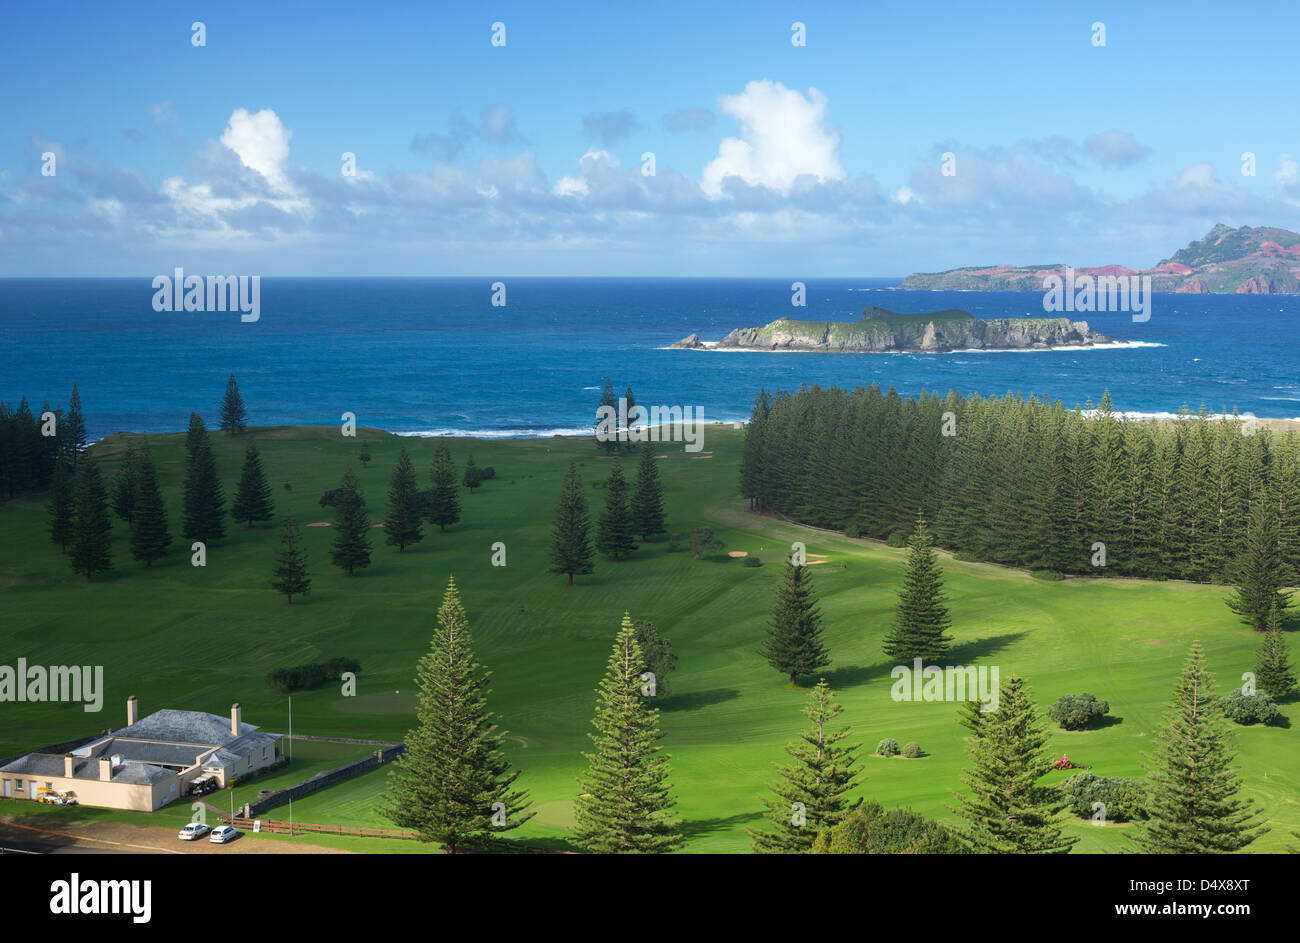 View of Philip Island and Nepean Island with Quality Row in the foreground, Norfolk Island, Australia Stock Photo